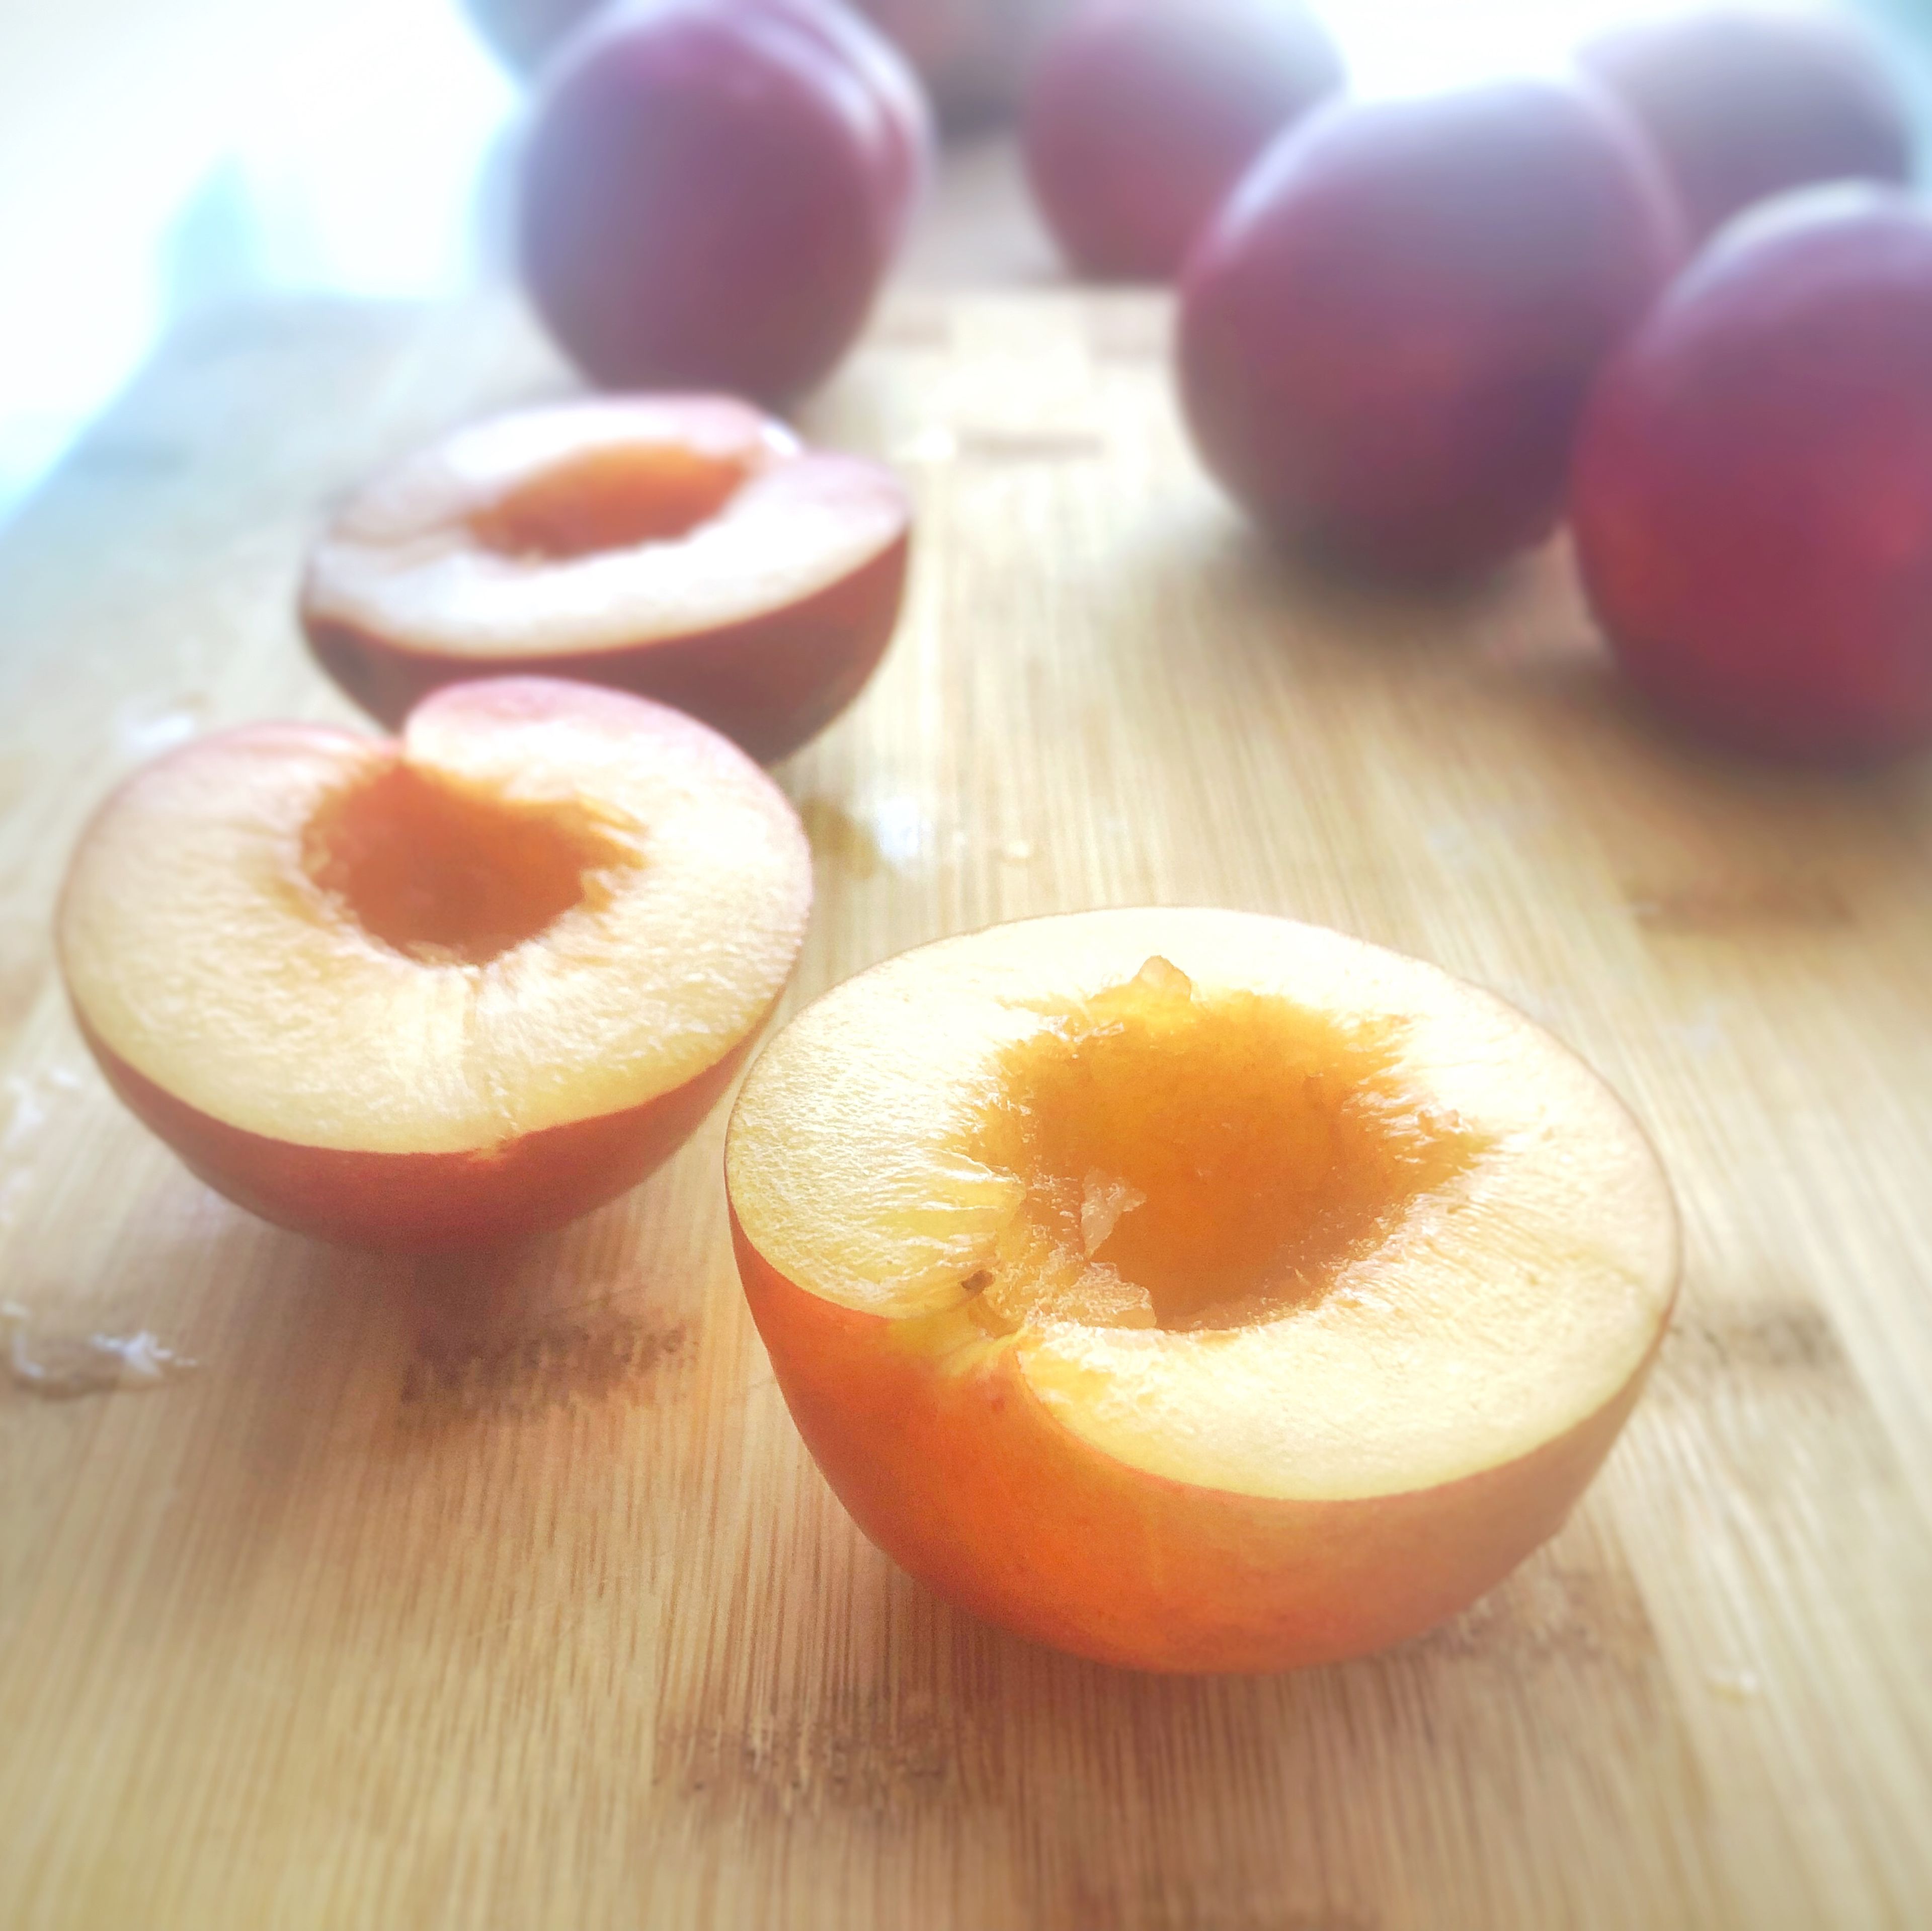 Cut the plums into small pieces.